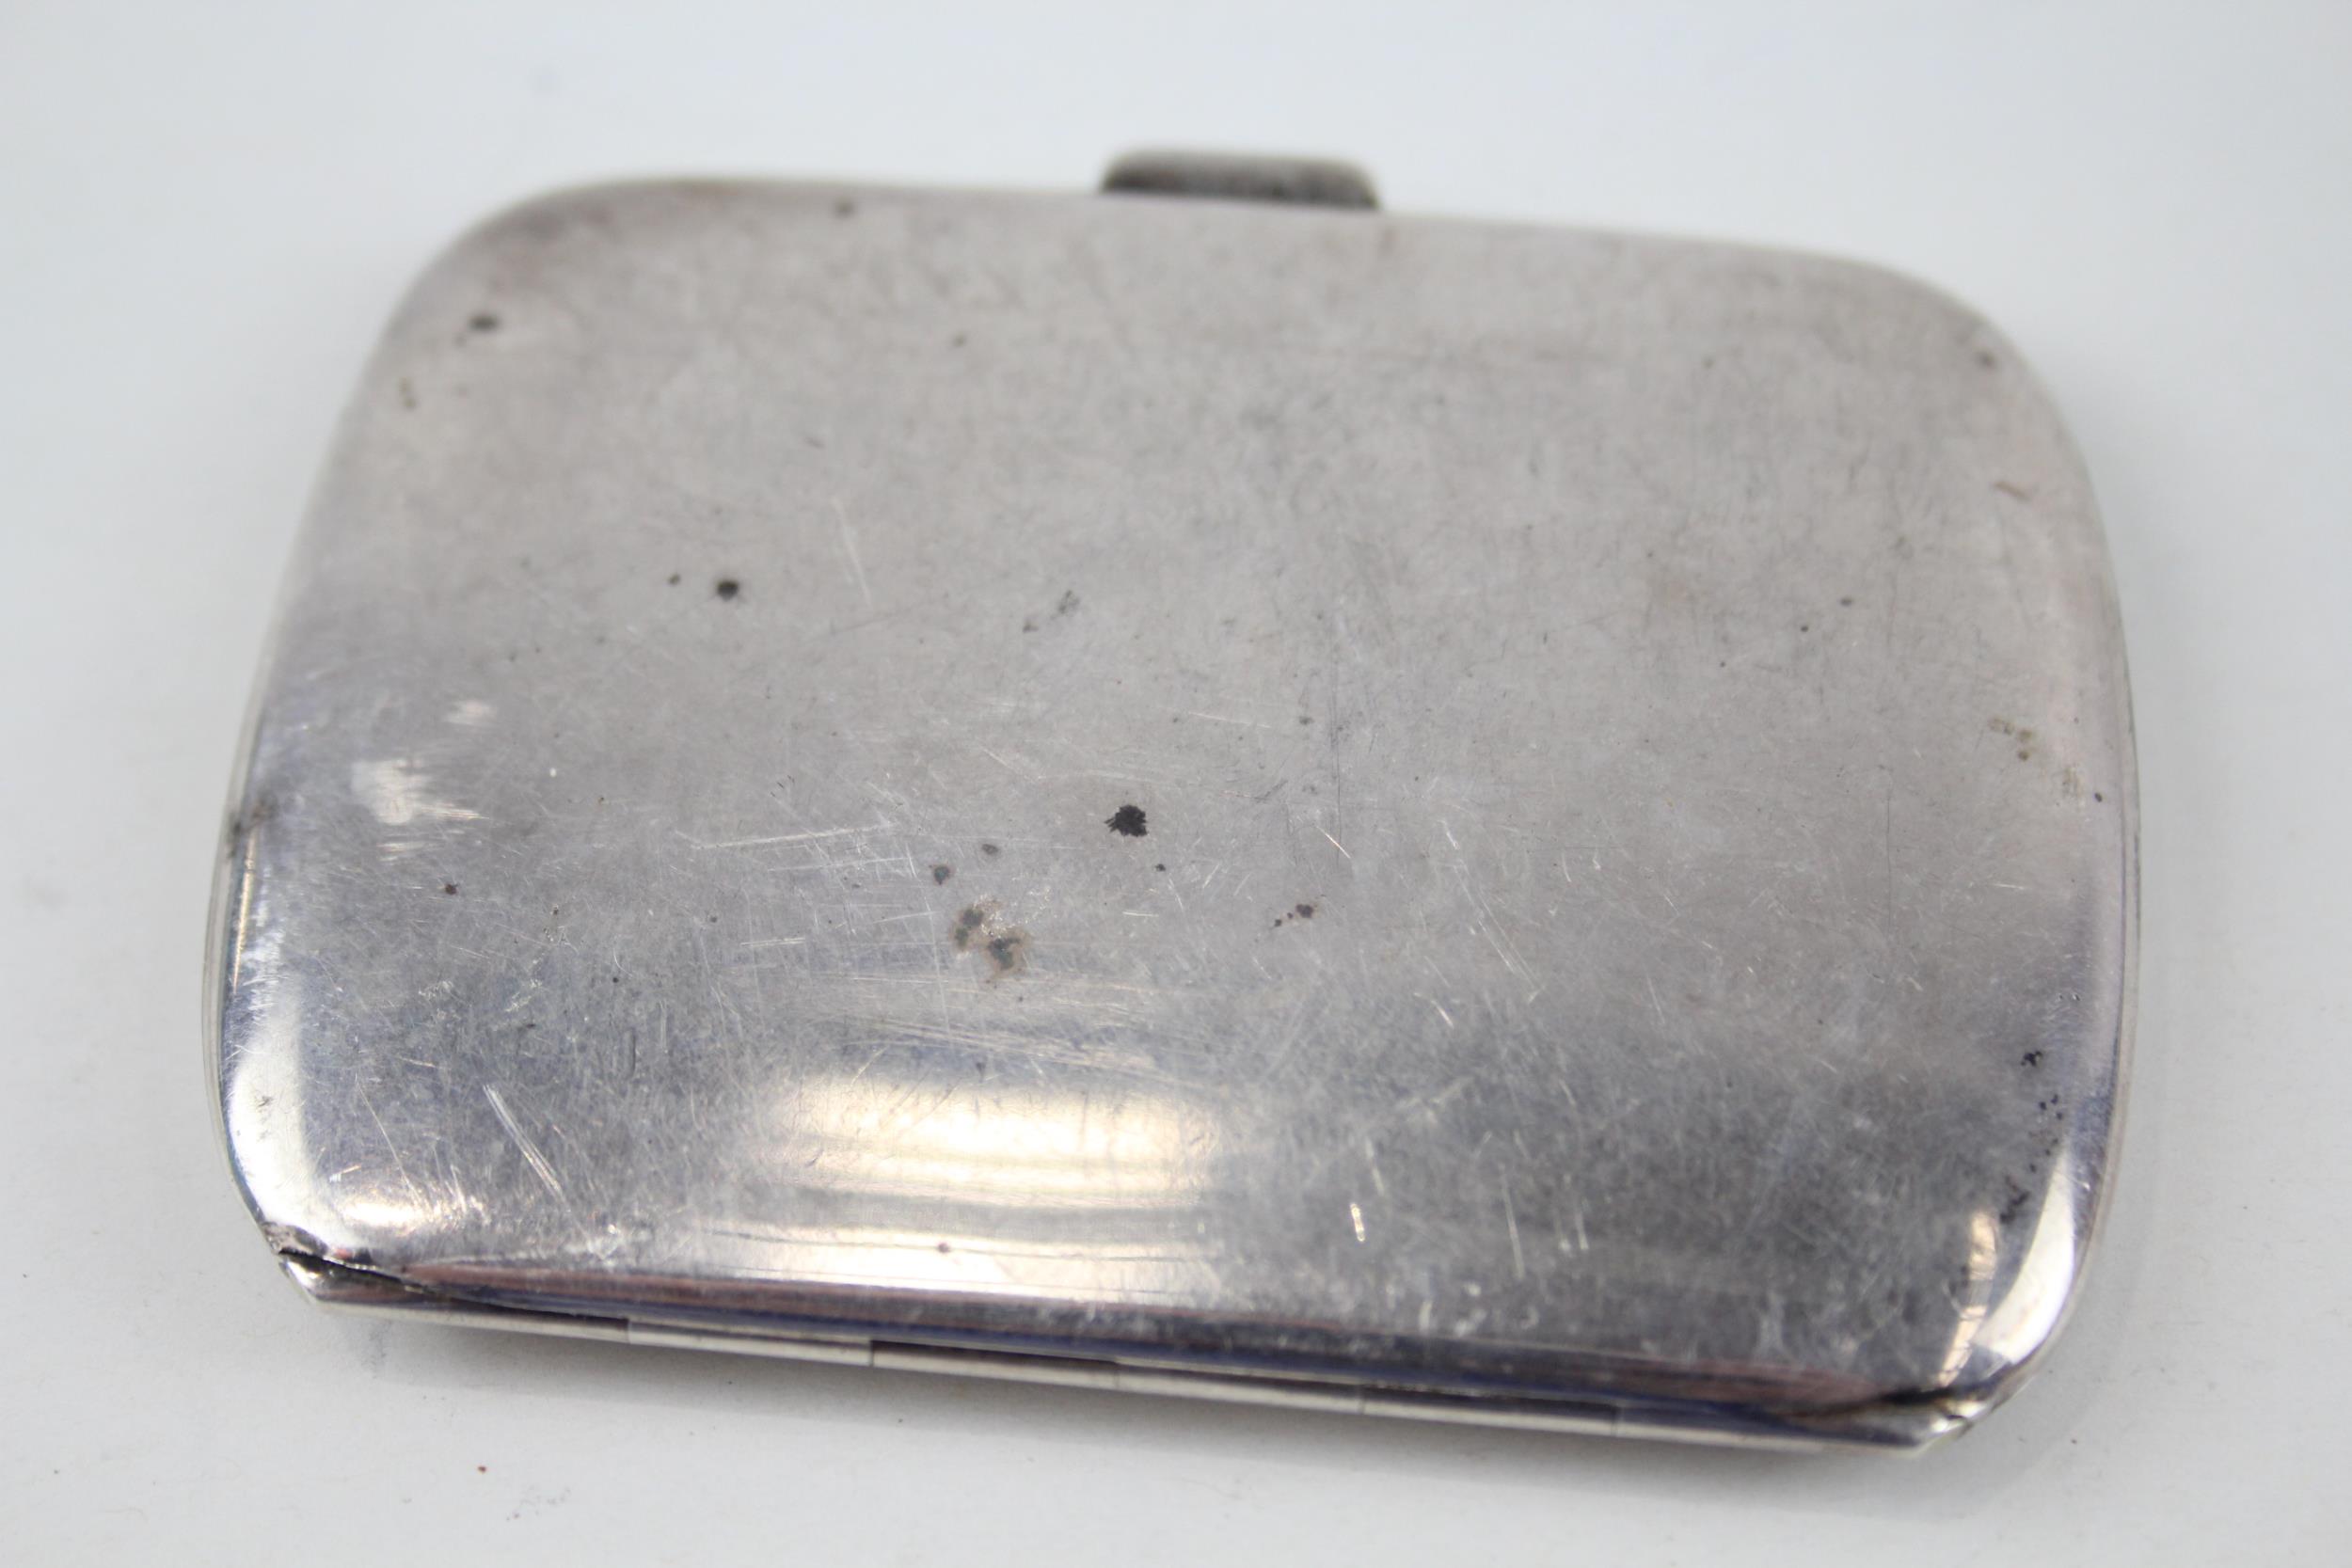 Antique Hallmarked 1924 Birmingham Sterling Silver Cigarette Case (77g) - w/ Personal Engraving - Image 6 of 6